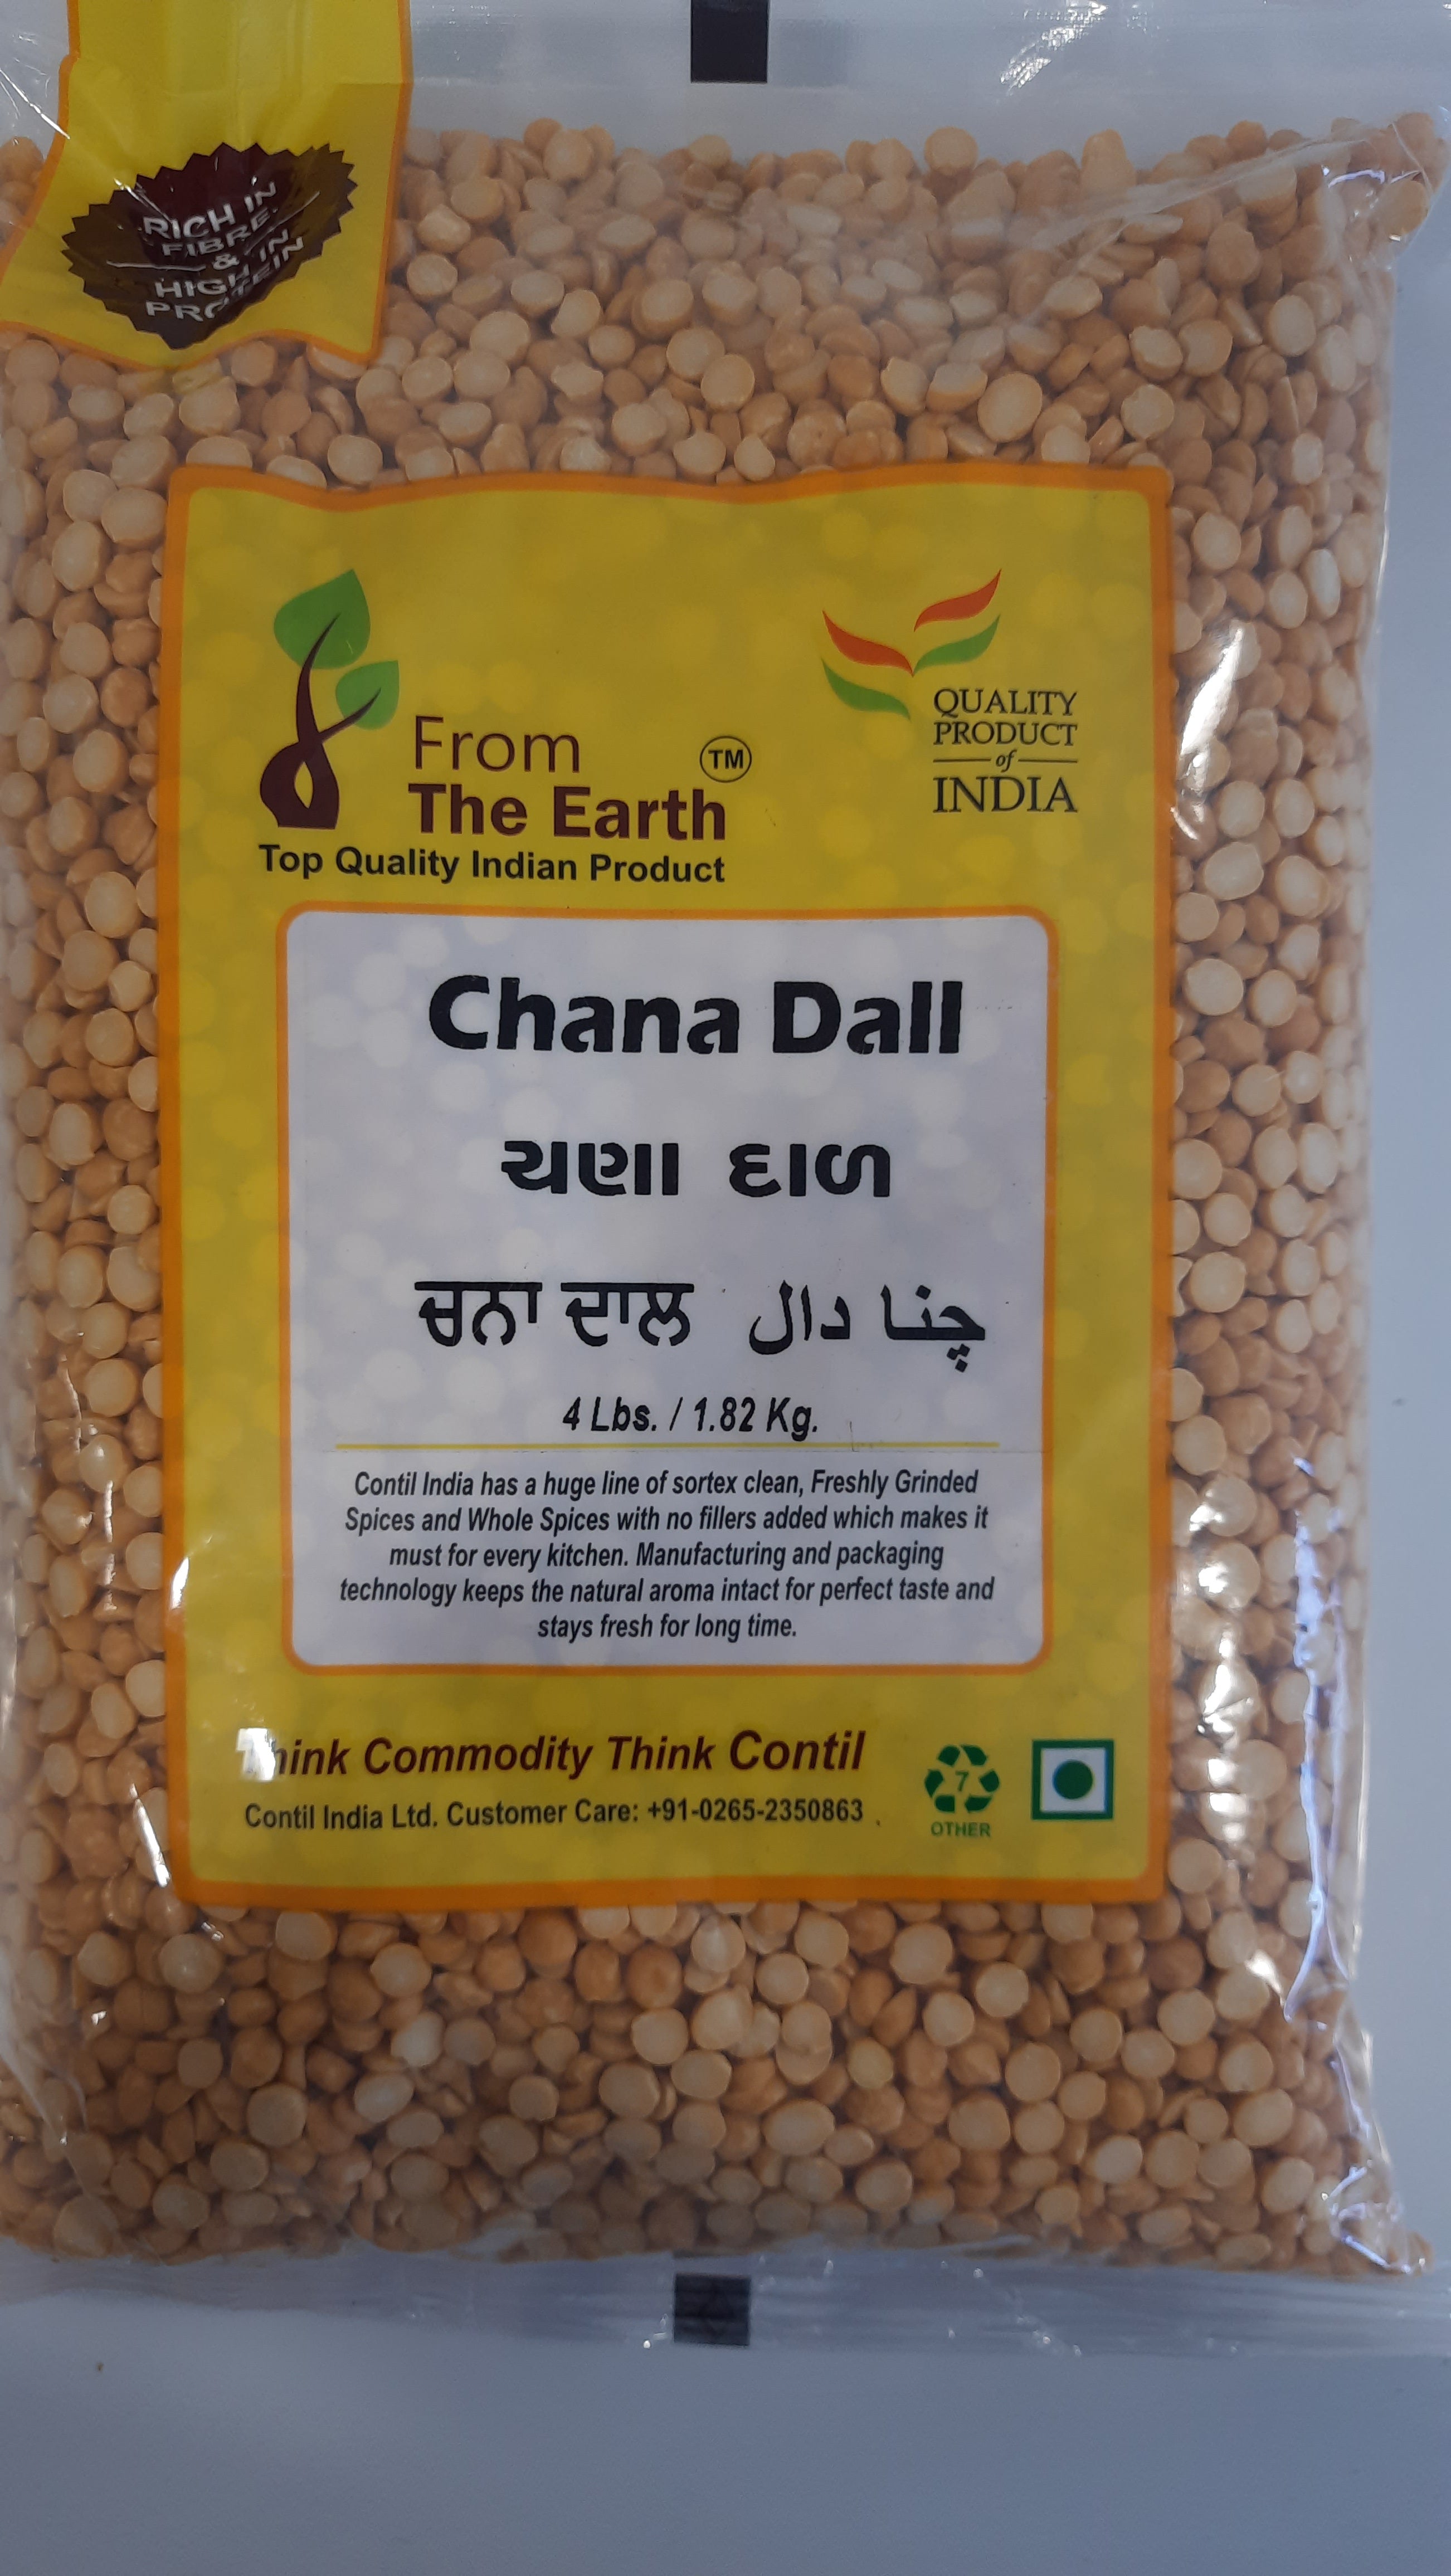 From the Earth - Chana Daal 4lb